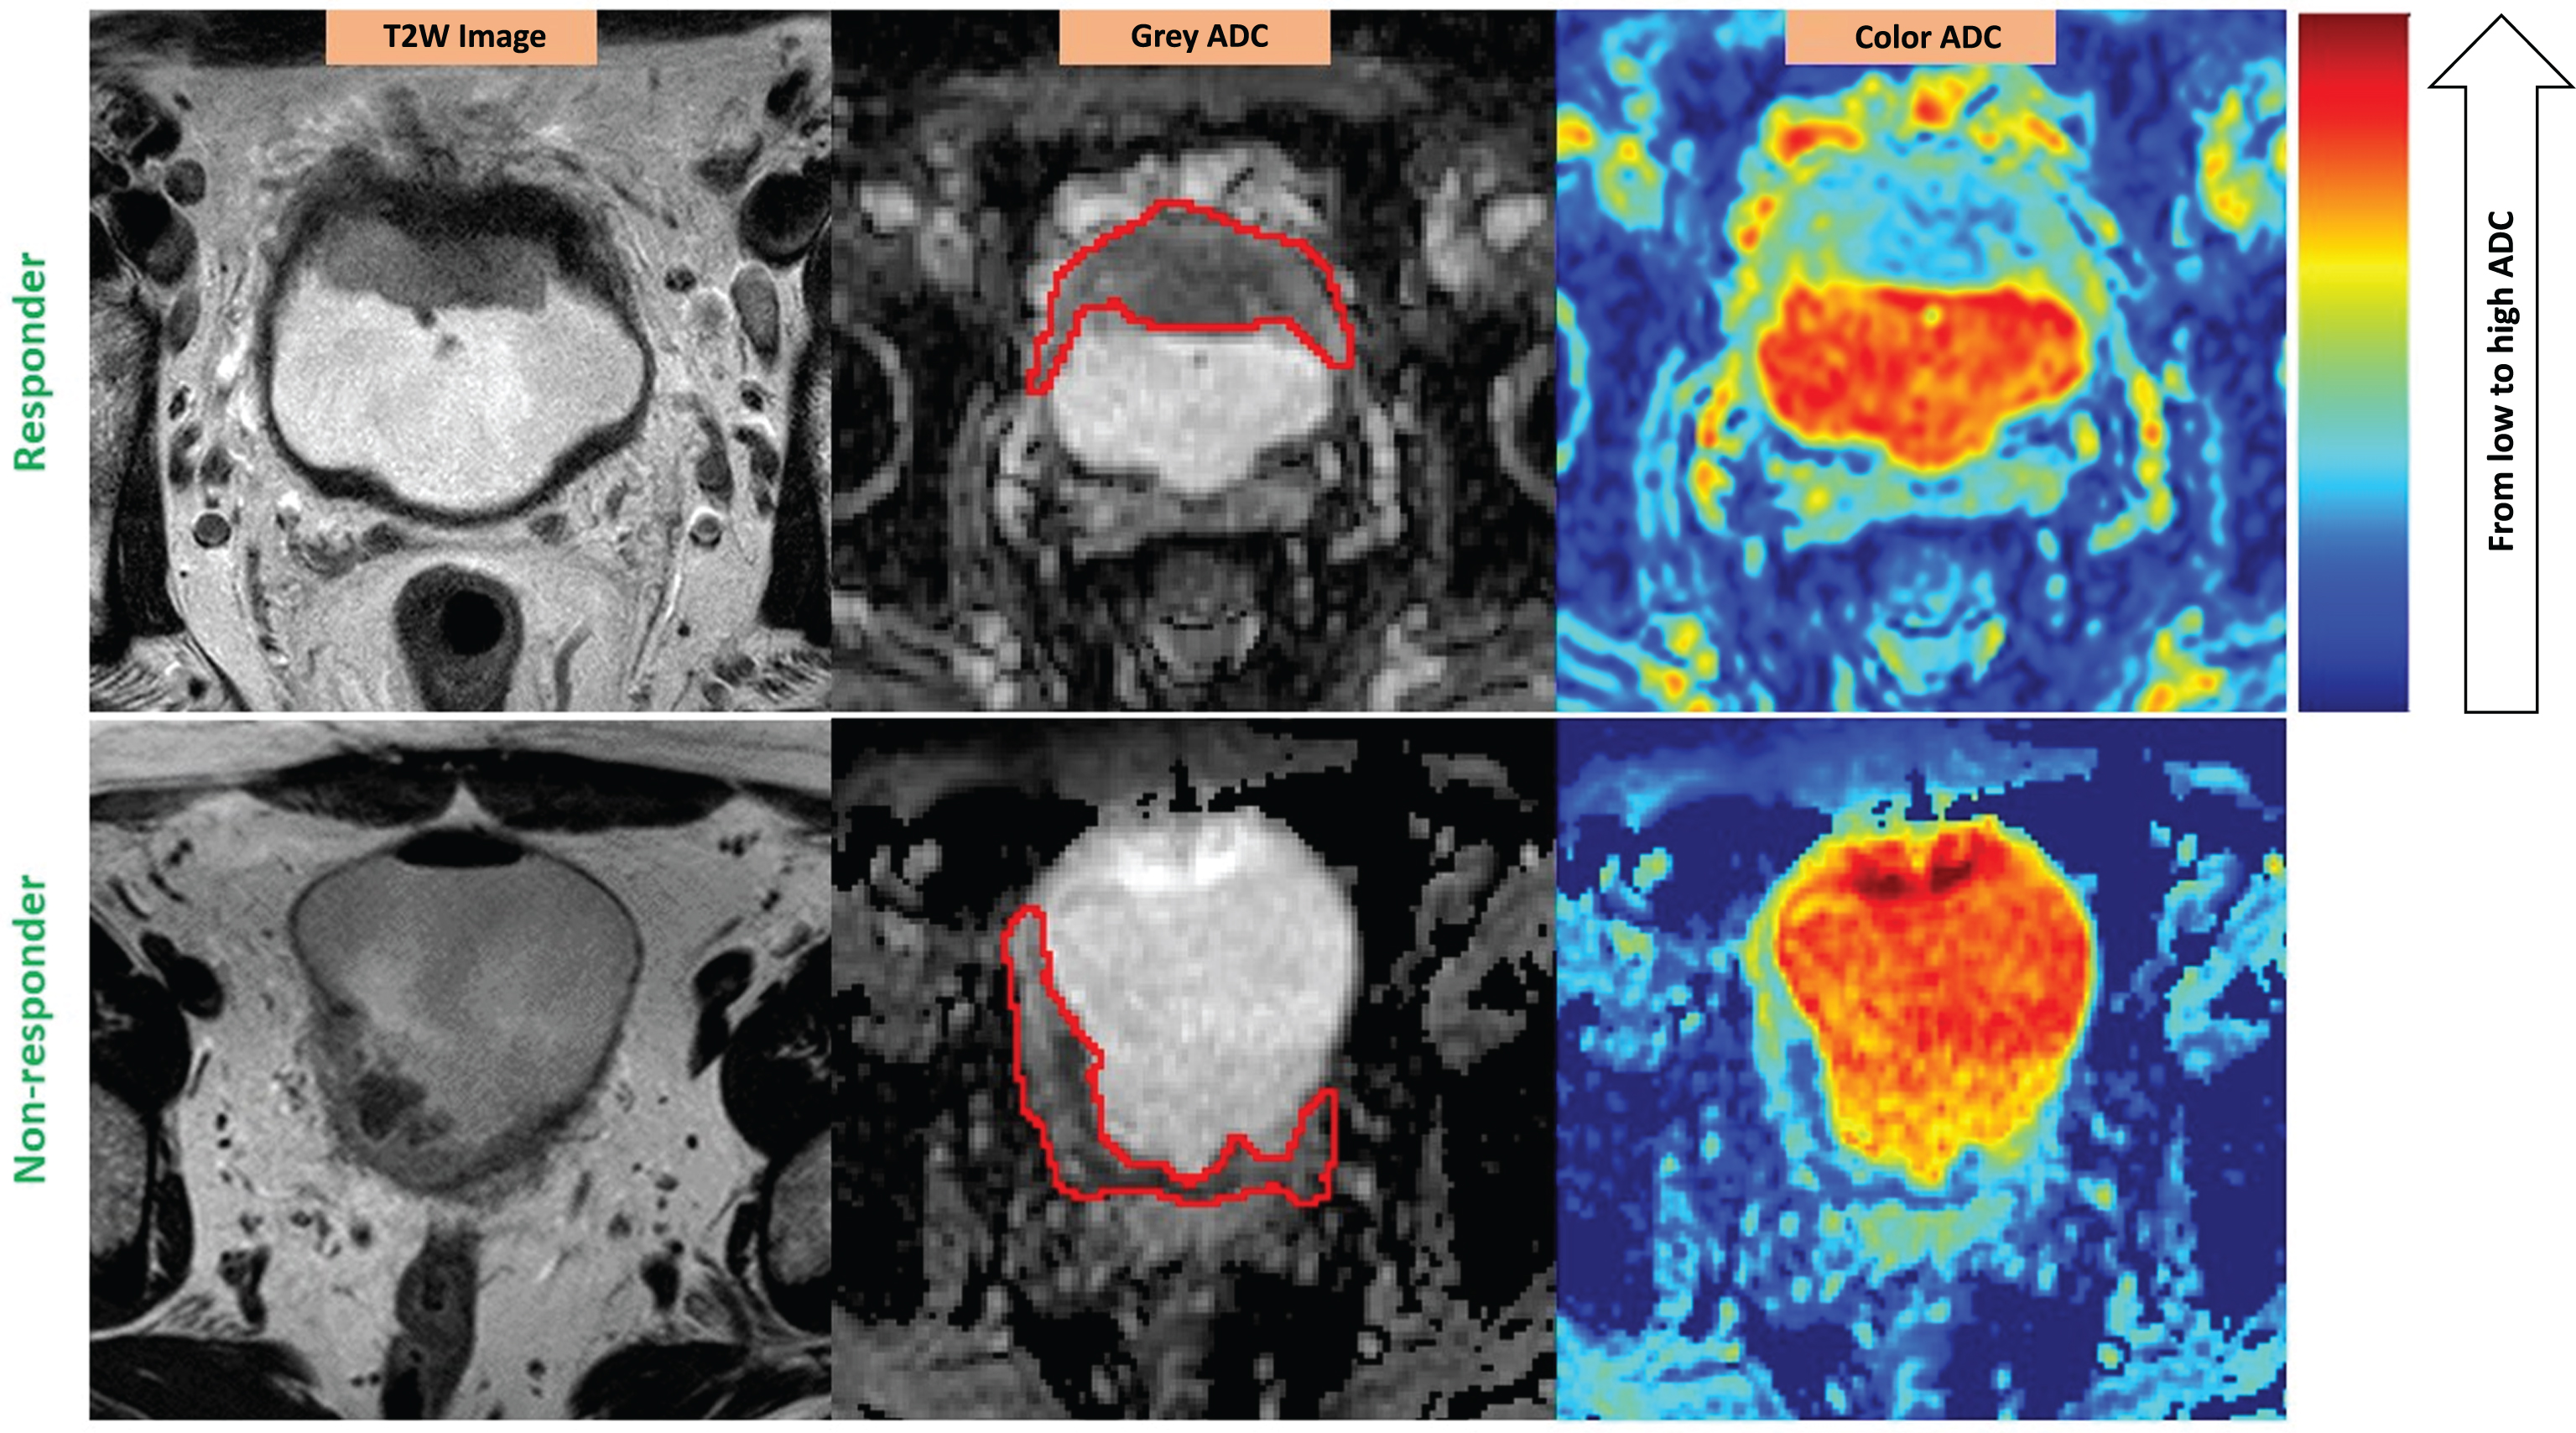 ADC heterogeneity in the bladder tumor of a responder (upper) vs. a non-responder (lower). Red contours illustrate the ROIs placed on the tumors. The color scale column is given on the right. ADC values are scaled with the color spectrum from the lowest ADC at the bottom to the highest ADC at the top of the column. Please note that higher micro-cellularity underlies lower ADC in tumor tissues. Responder (stage pT1N0): U = 0.08; E = 3.81; Non-responder (stage pT3bN0): U = 0.06; E = 4.12.